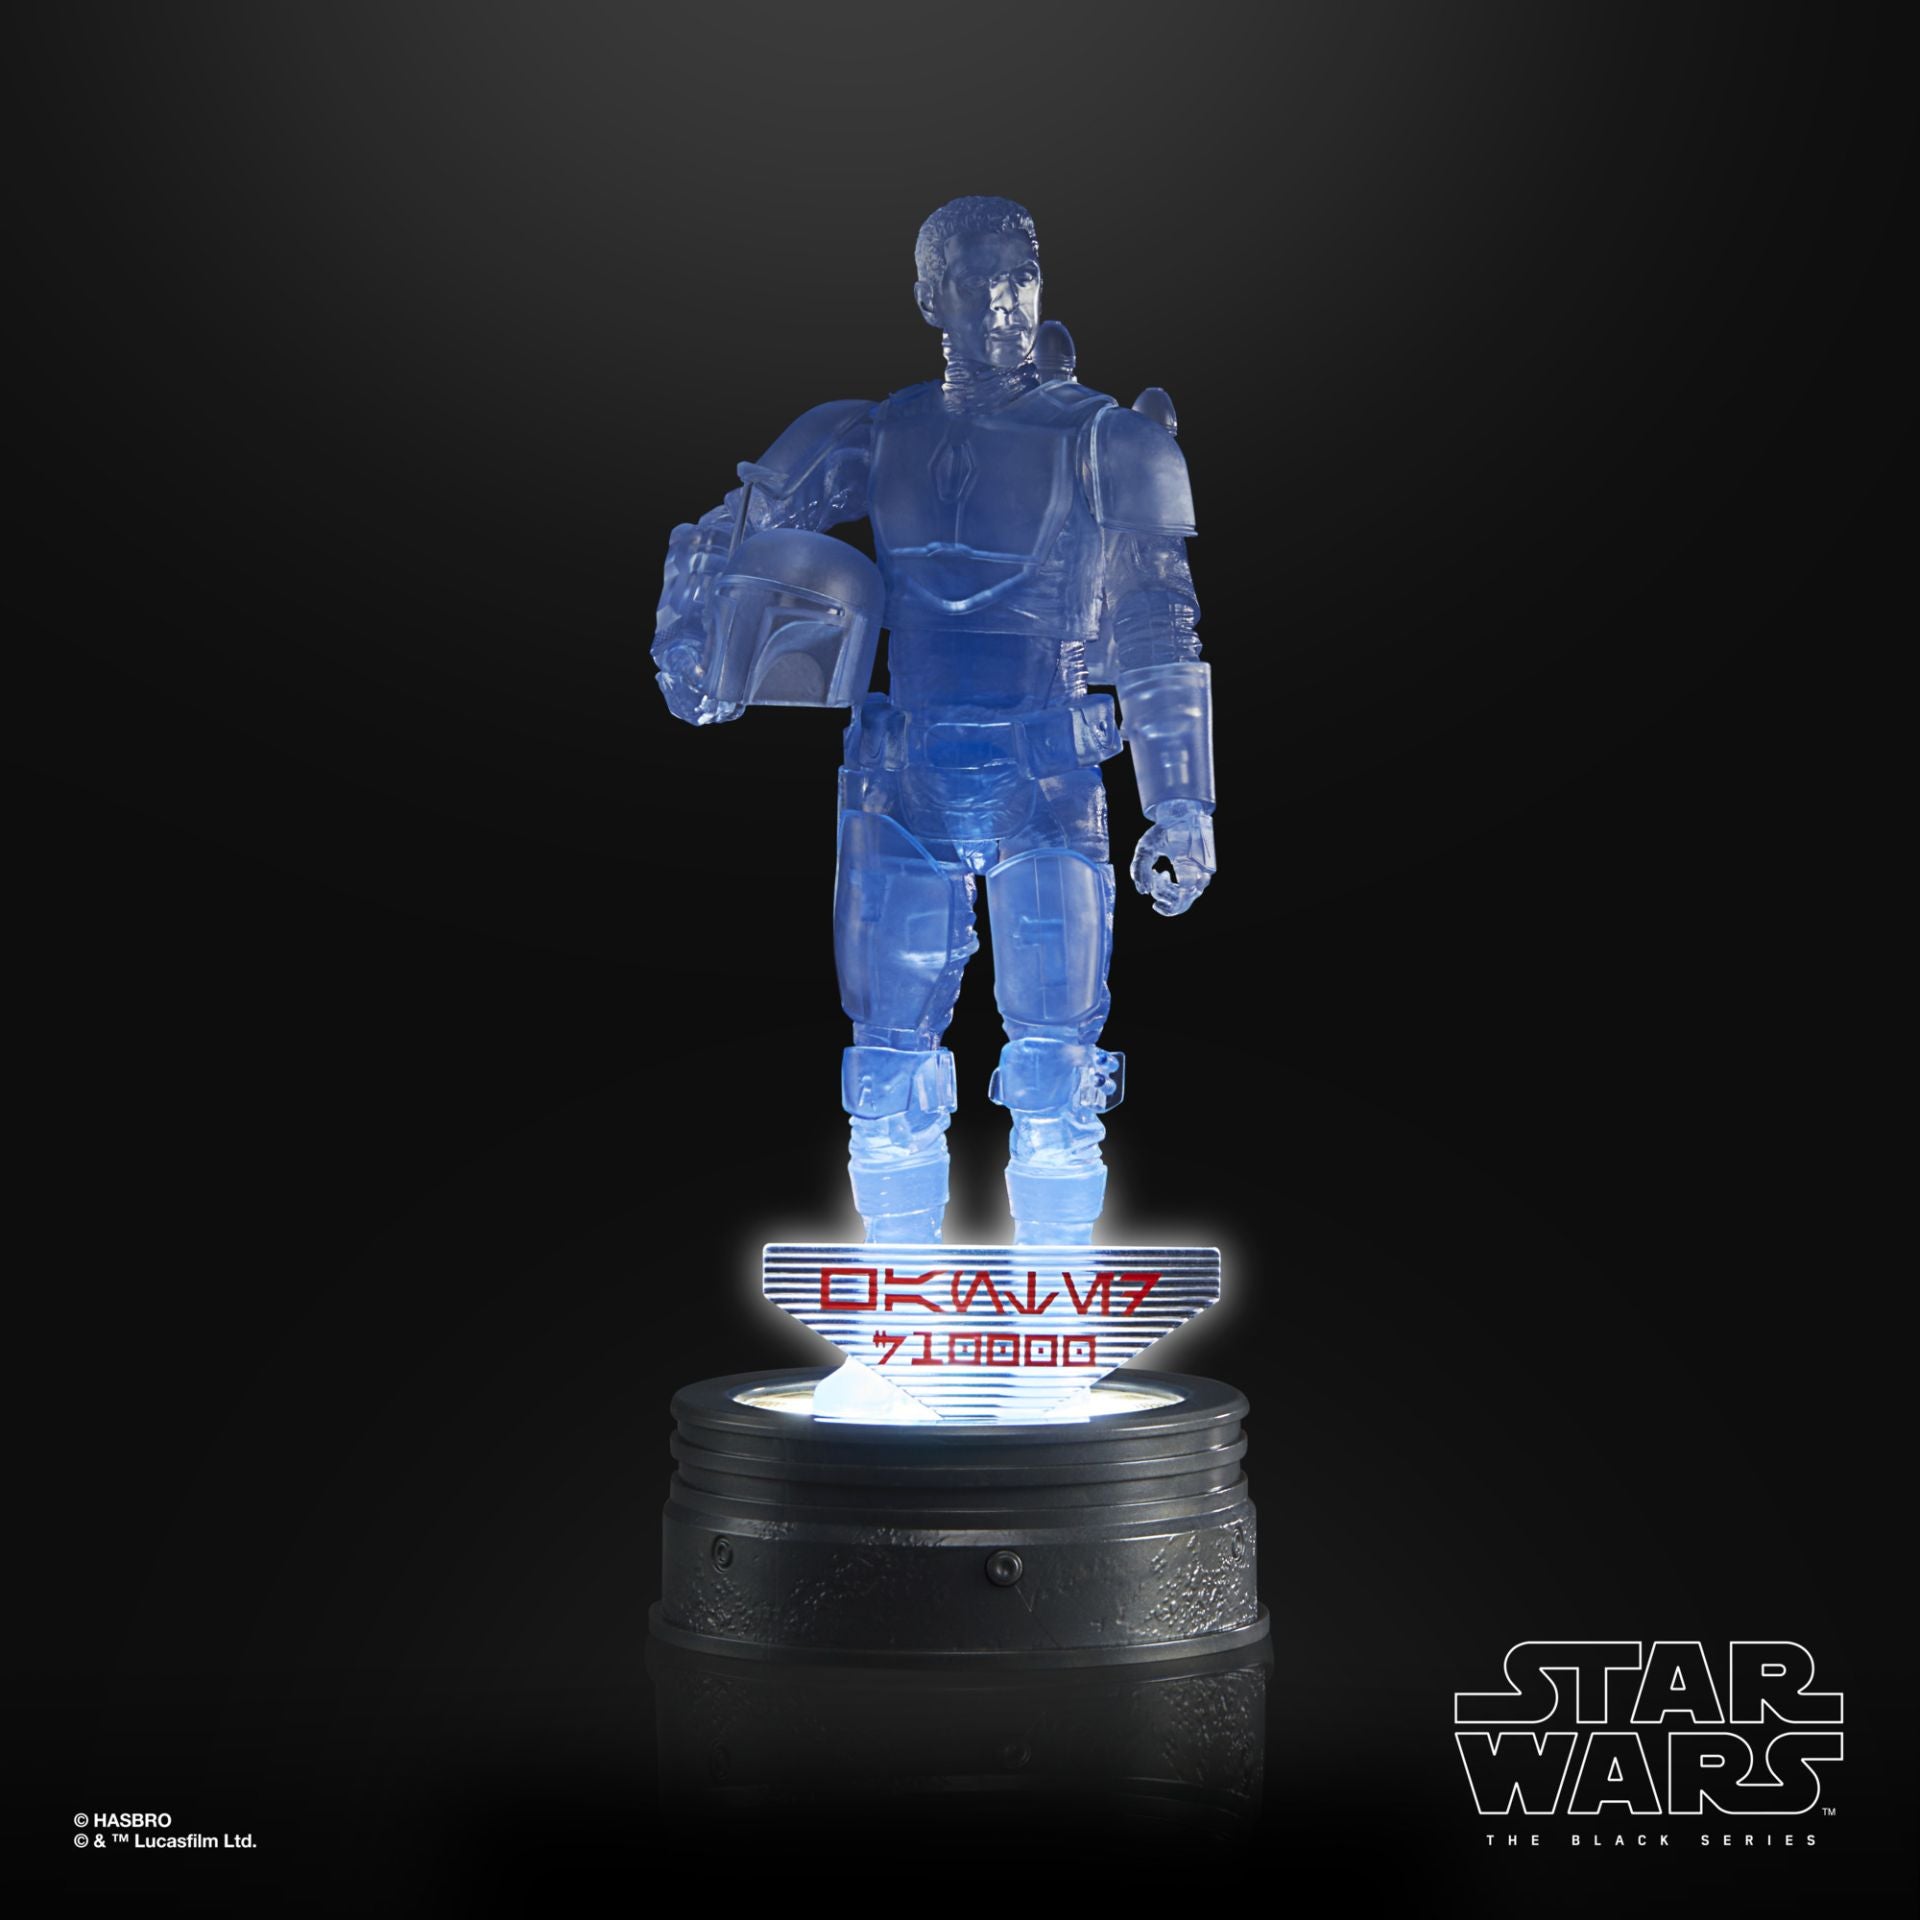 Hasbro - Star Wars: The Black Series - Axe Woves (Holocomm Collection) (6&quot;) - Marvelous Toys